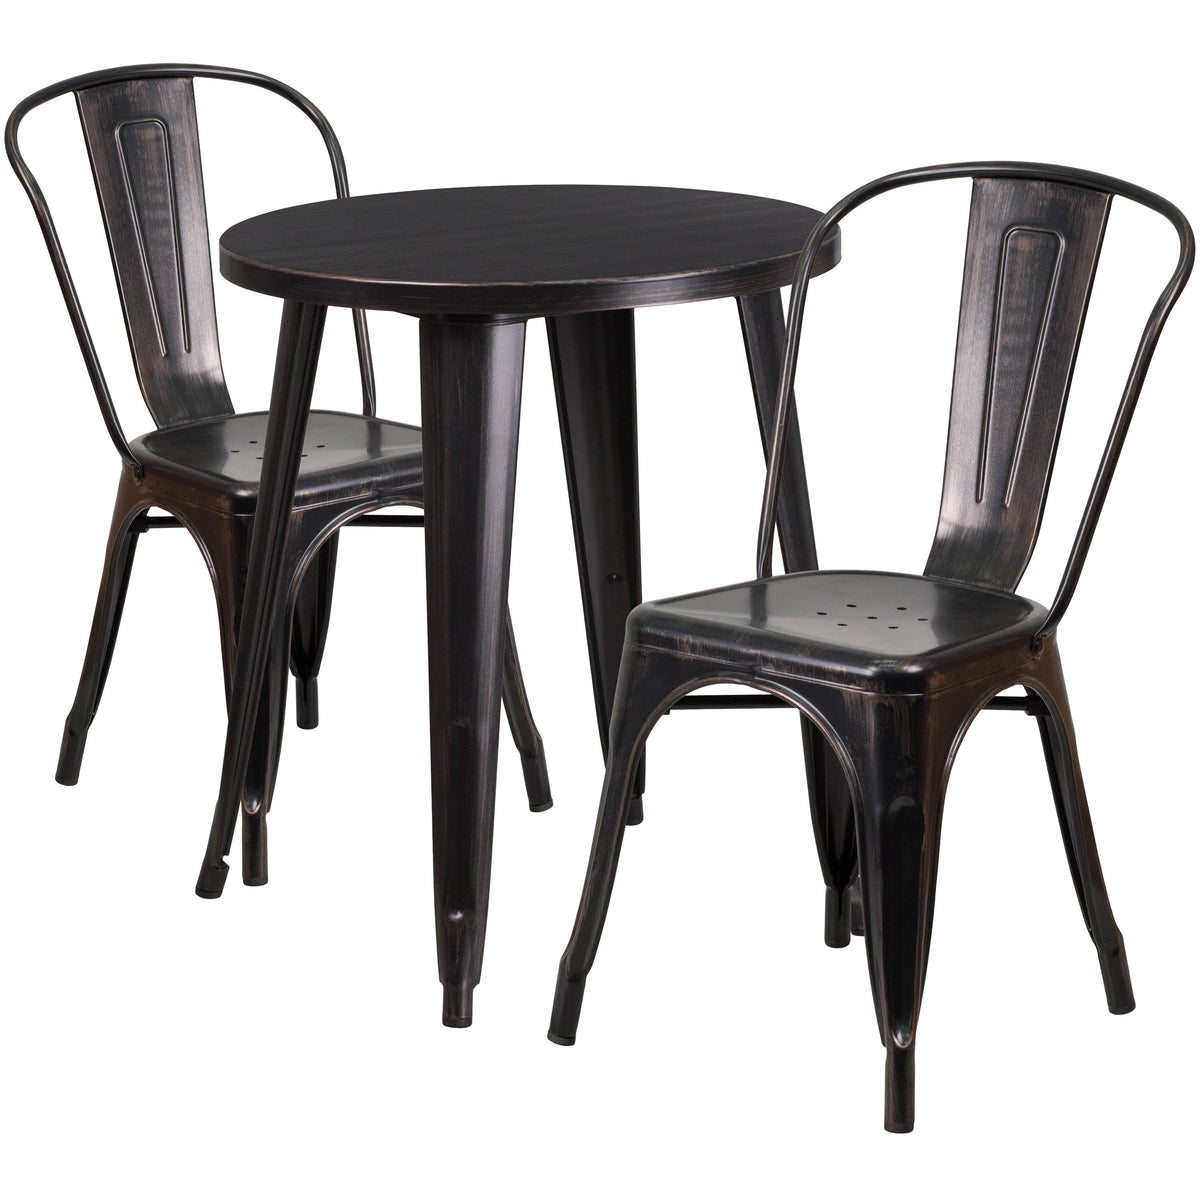 Black-Antique Gold |#| 24inch Round Black-Gold Metal Indoor-Outdoor Table Set w/ 2 Cafe Chairs - Patio Set